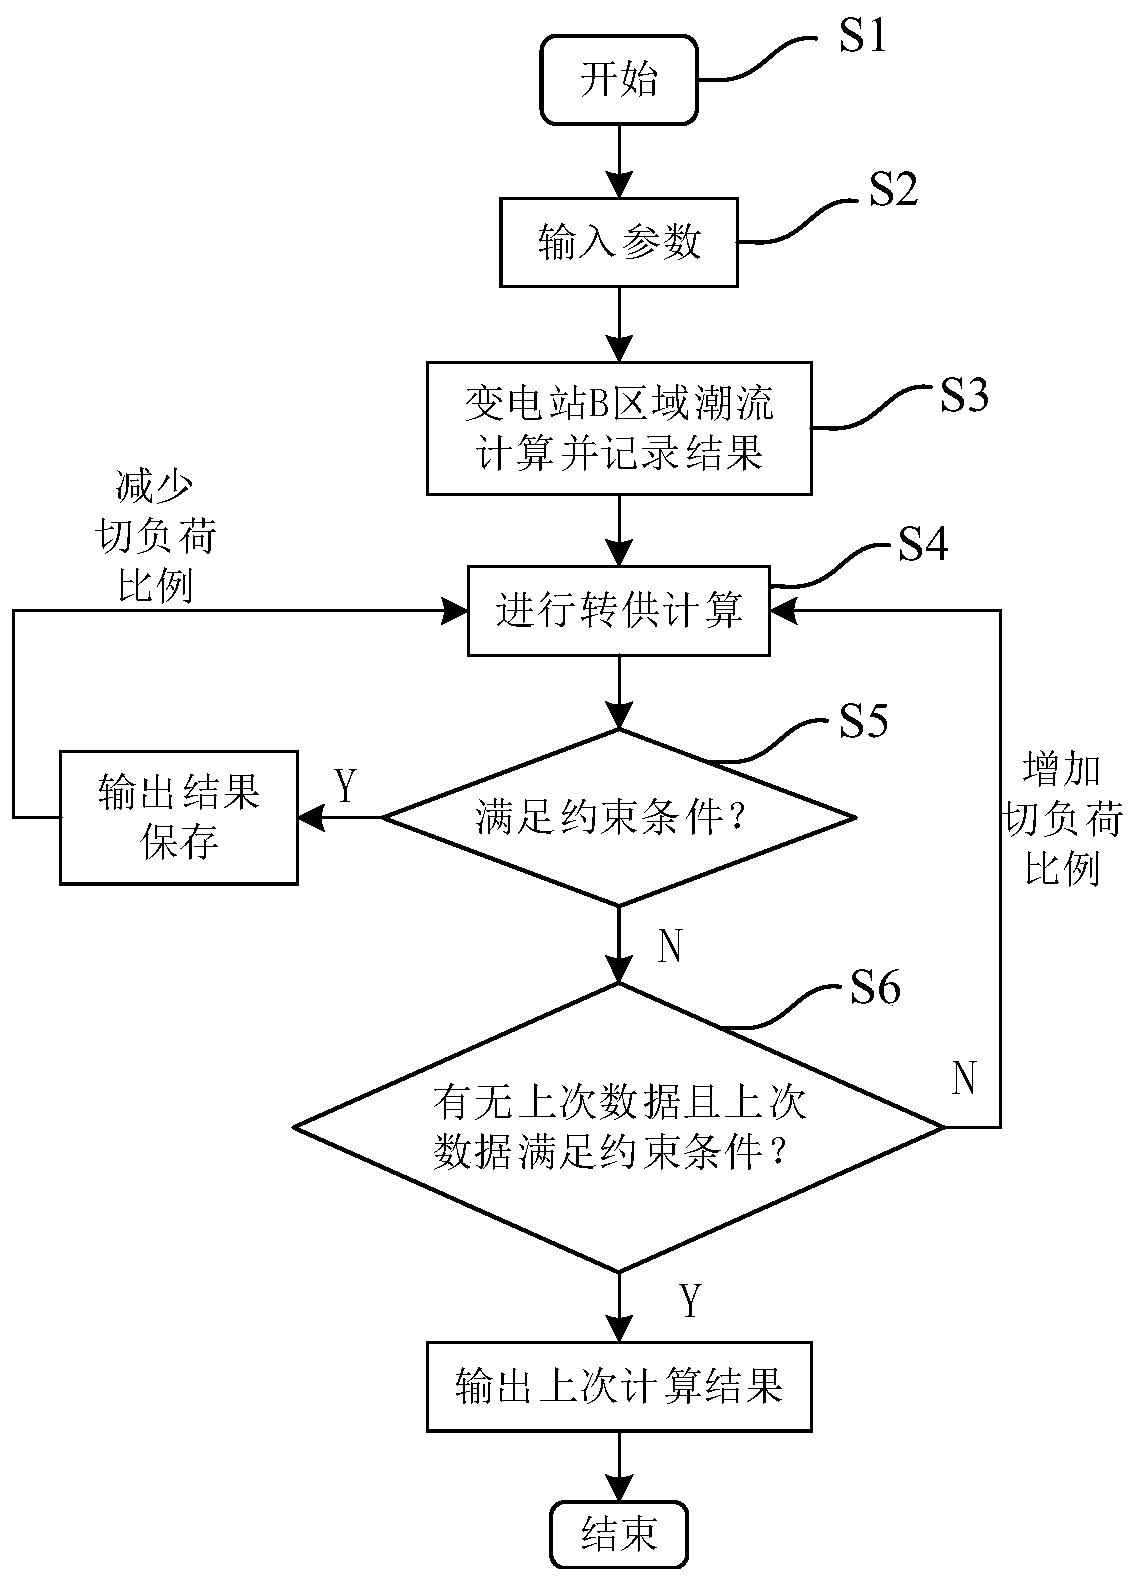 Load transfer method and device for improving reliability of distribution network